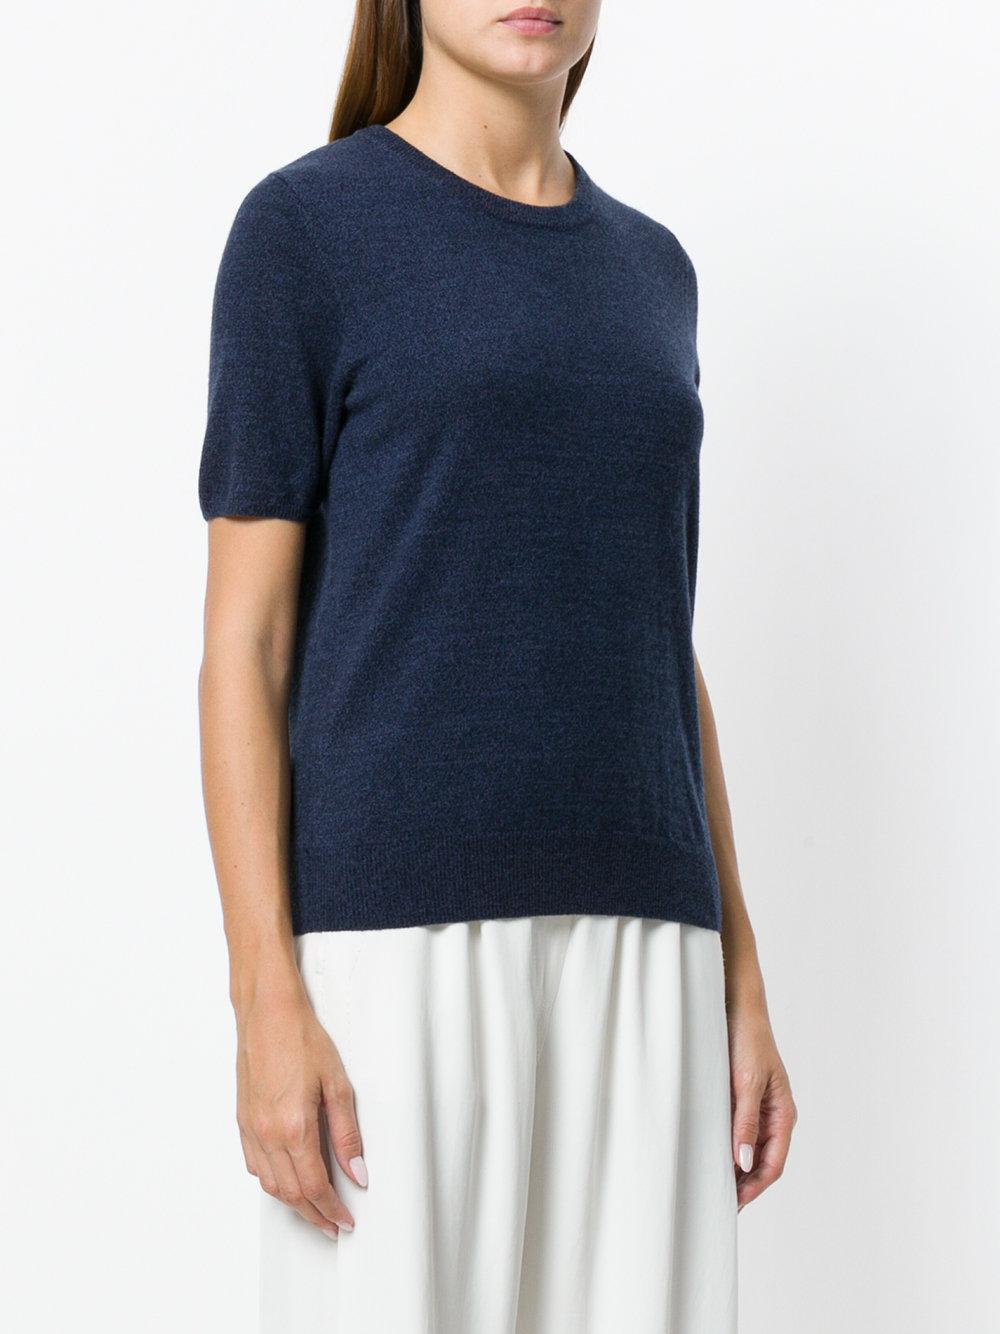 Lyst - N.Peal Cashmere Round Neck T-shirt in Blue